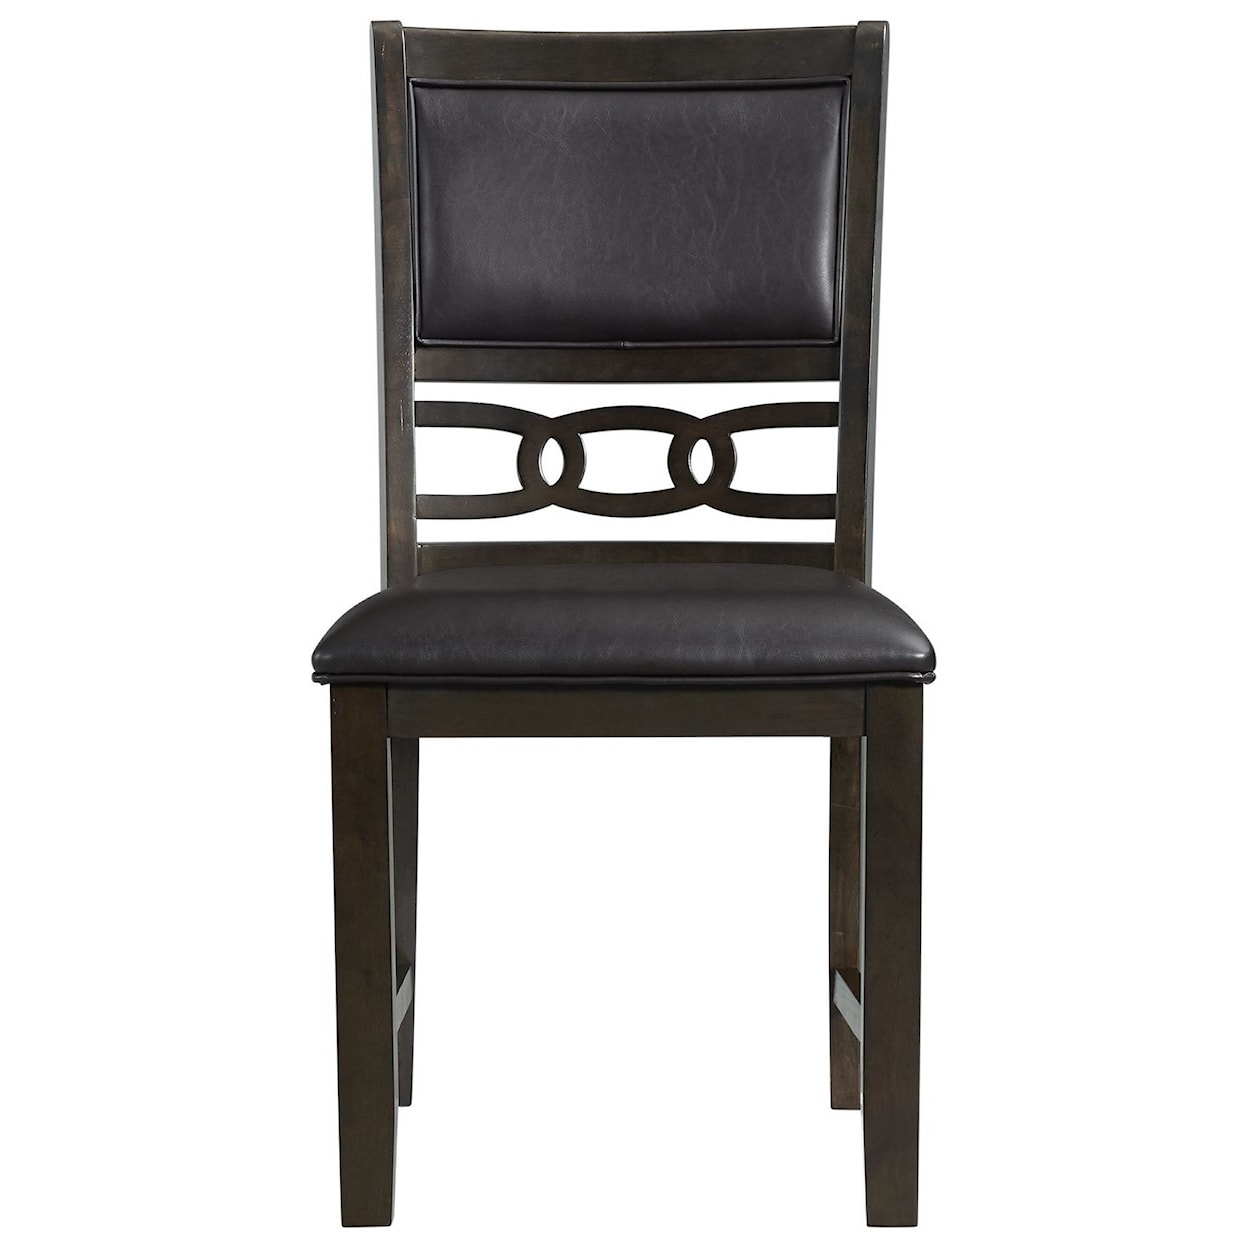 Elements International Amherst Standard Height Faux Leather Side Chair